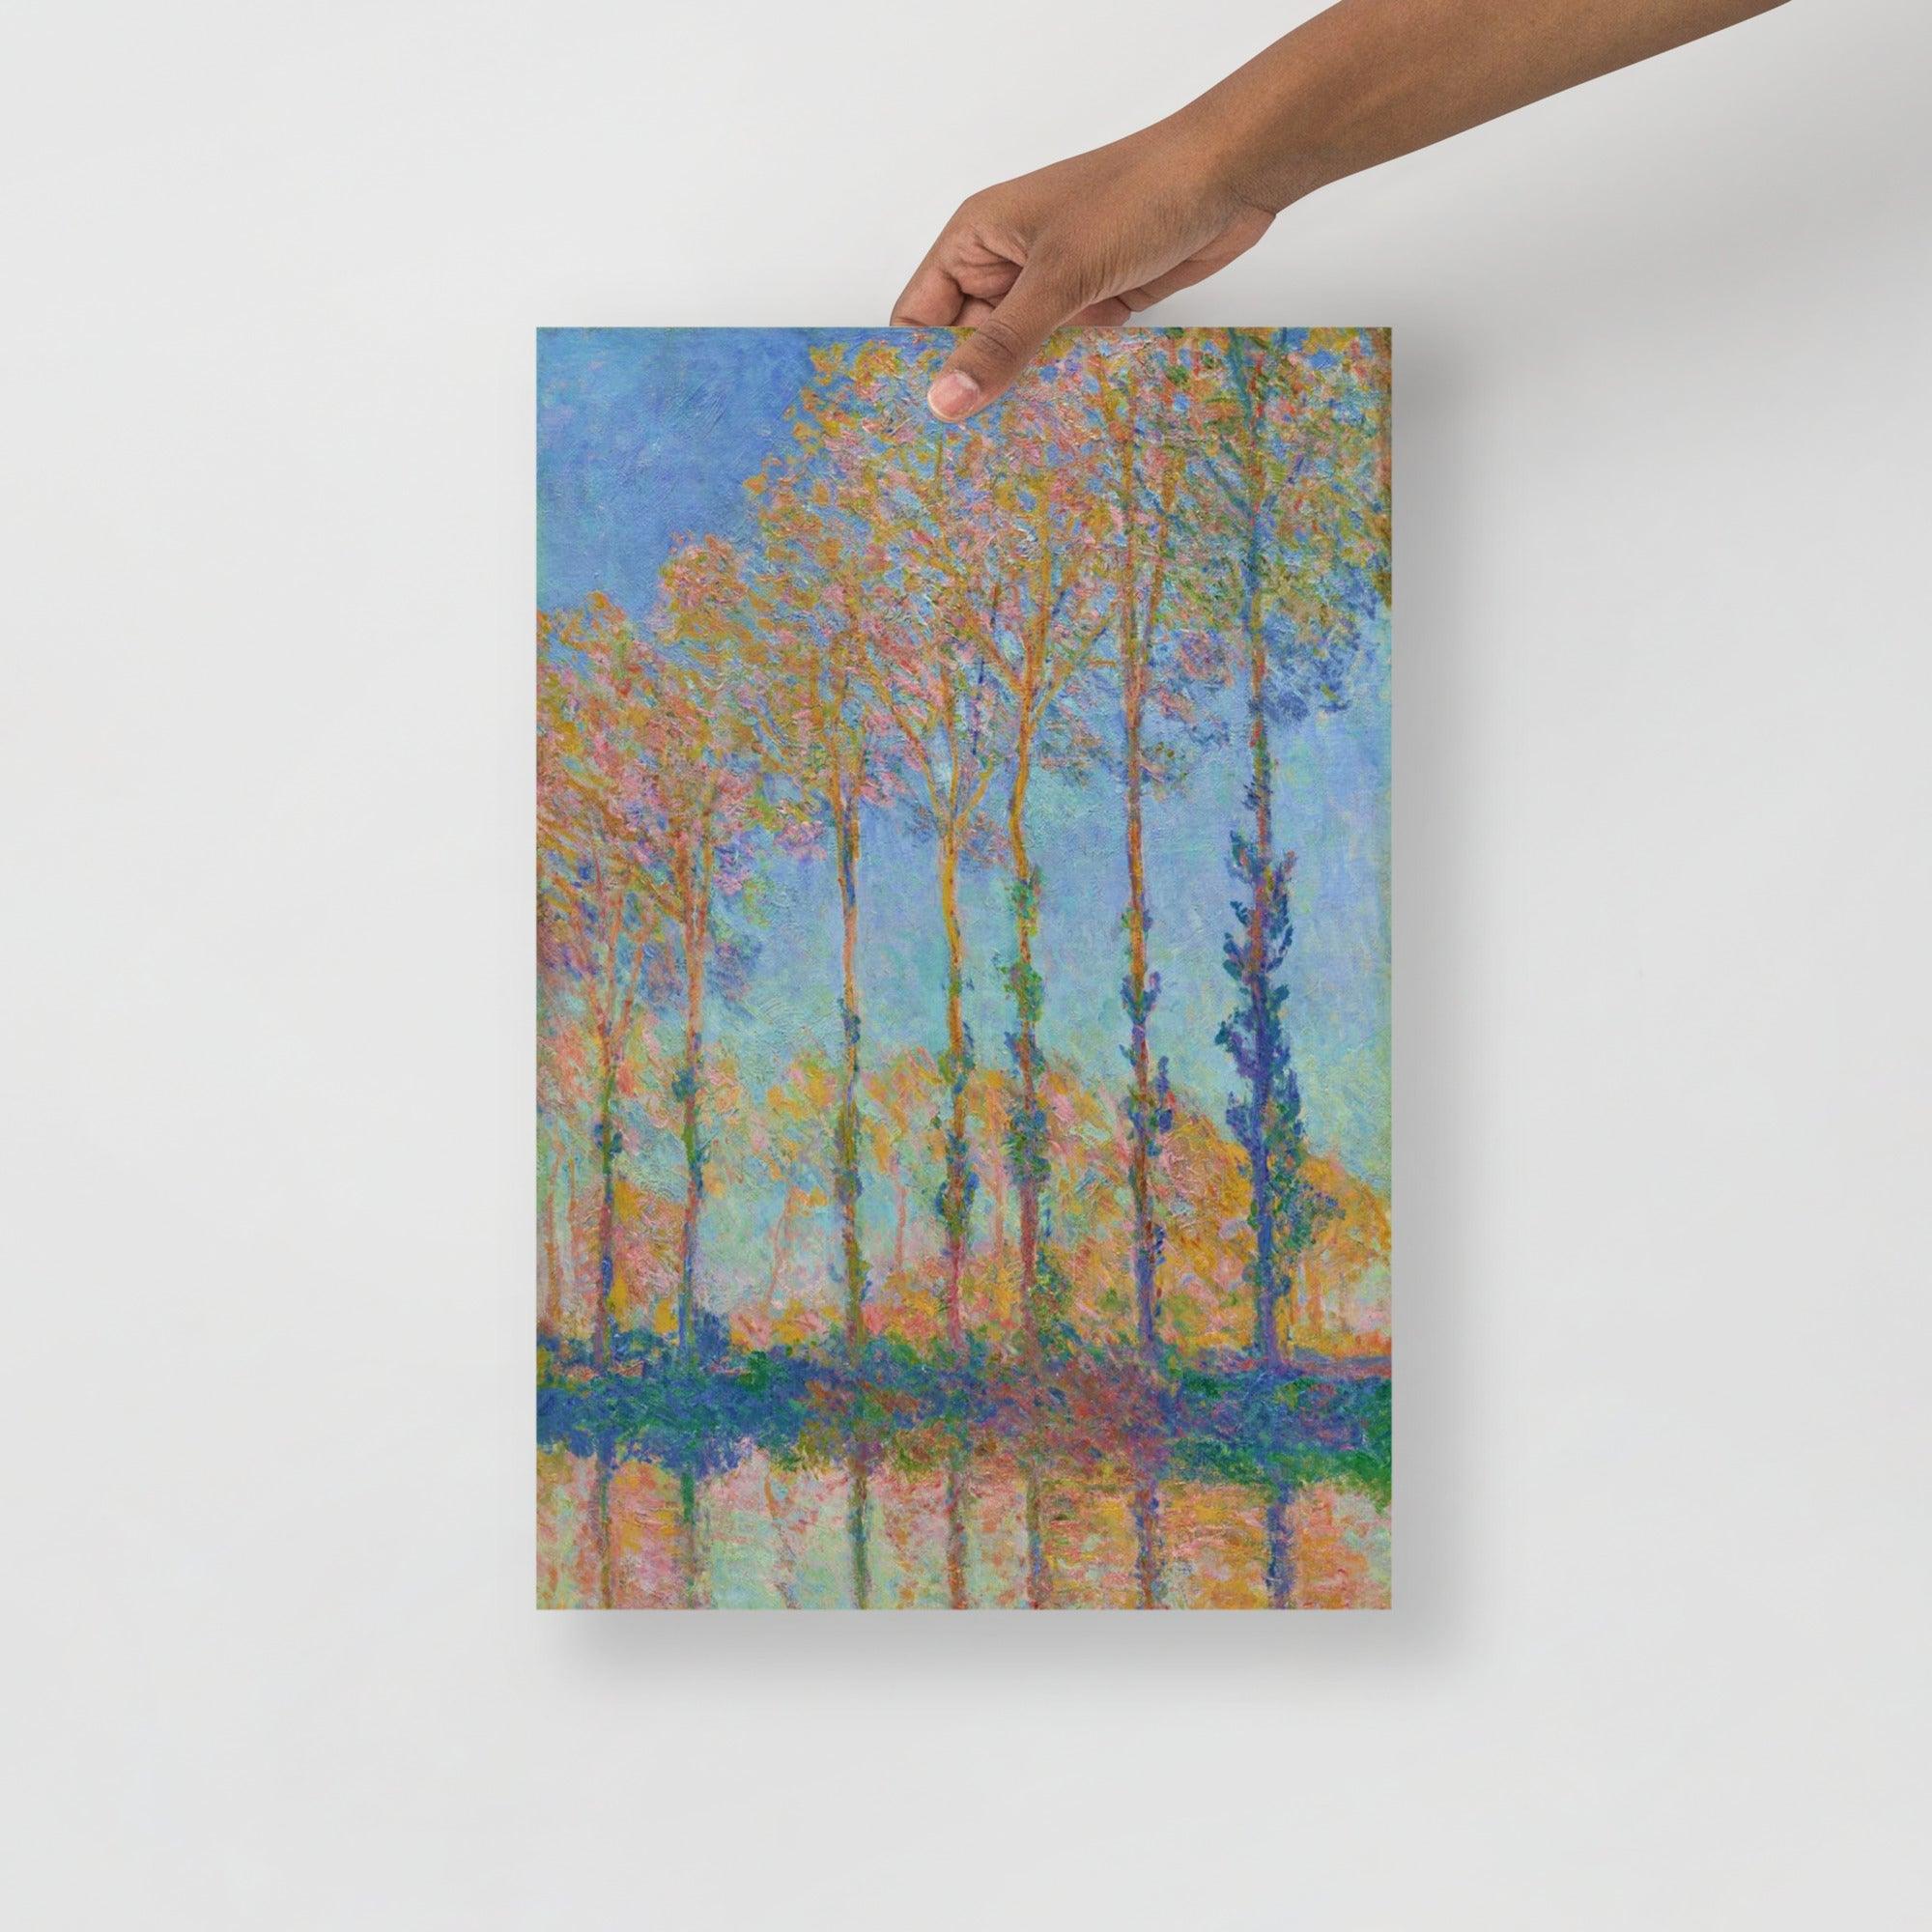 A Poplars on the Bank of the Epte River by Claude Monet poster on a plain backdrop in size 12x18”.